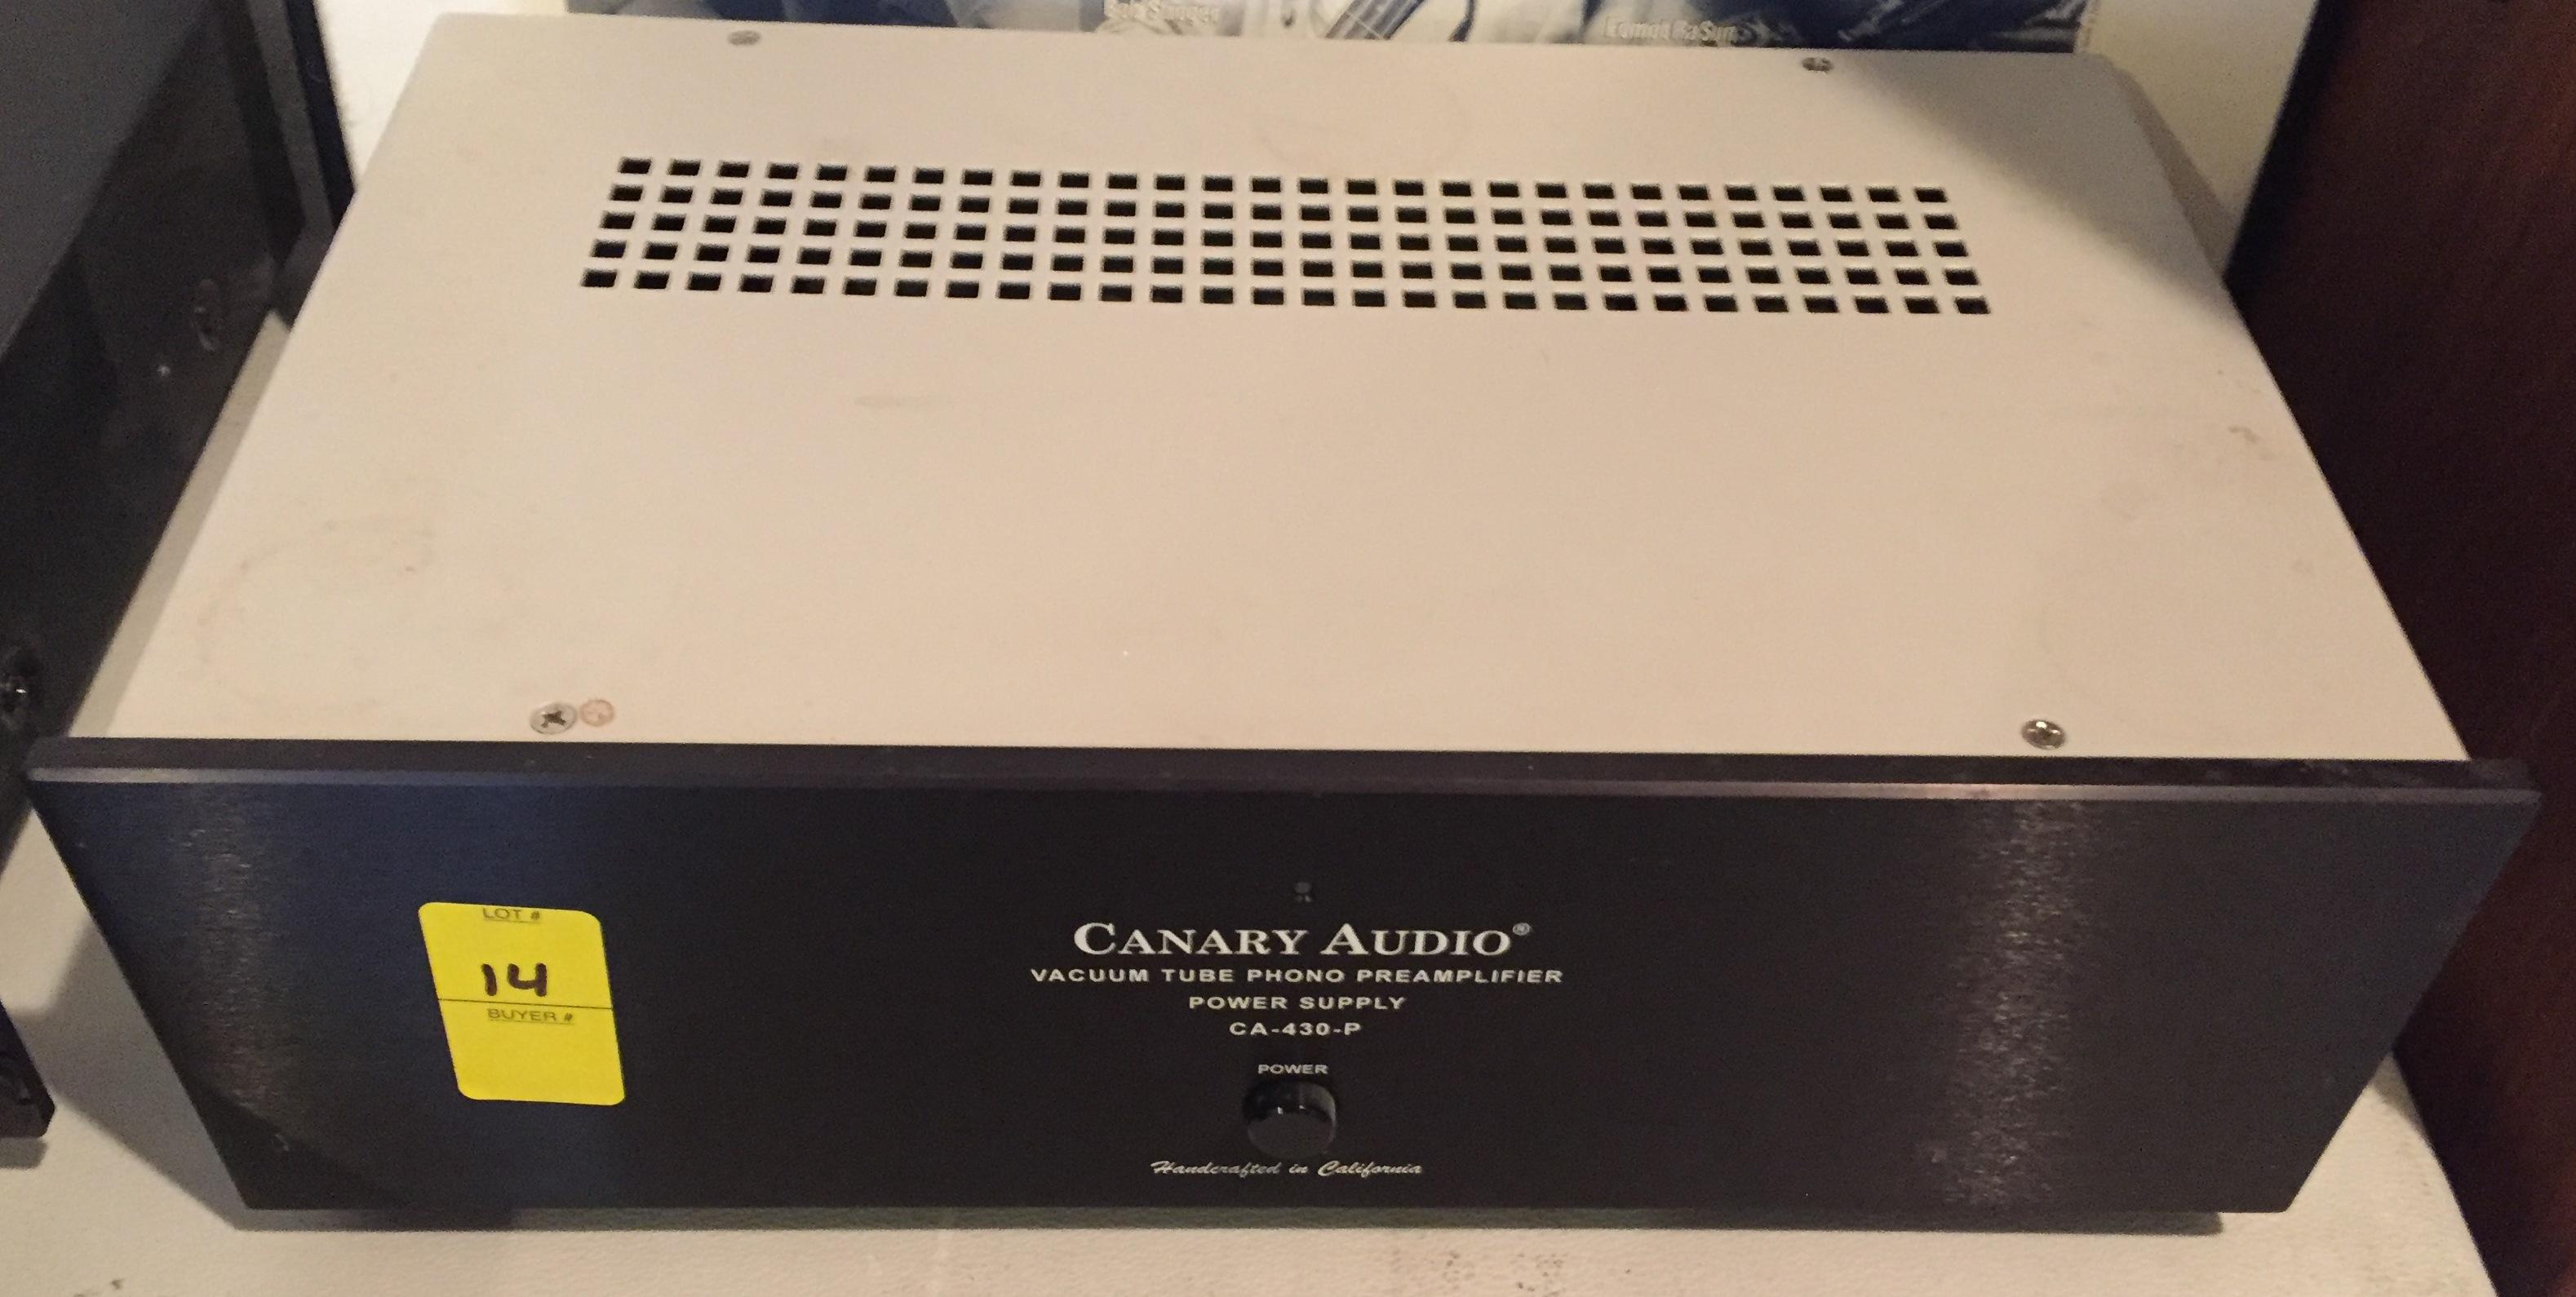 Canary Audio Phono Preamp Power Supply CA-430-P